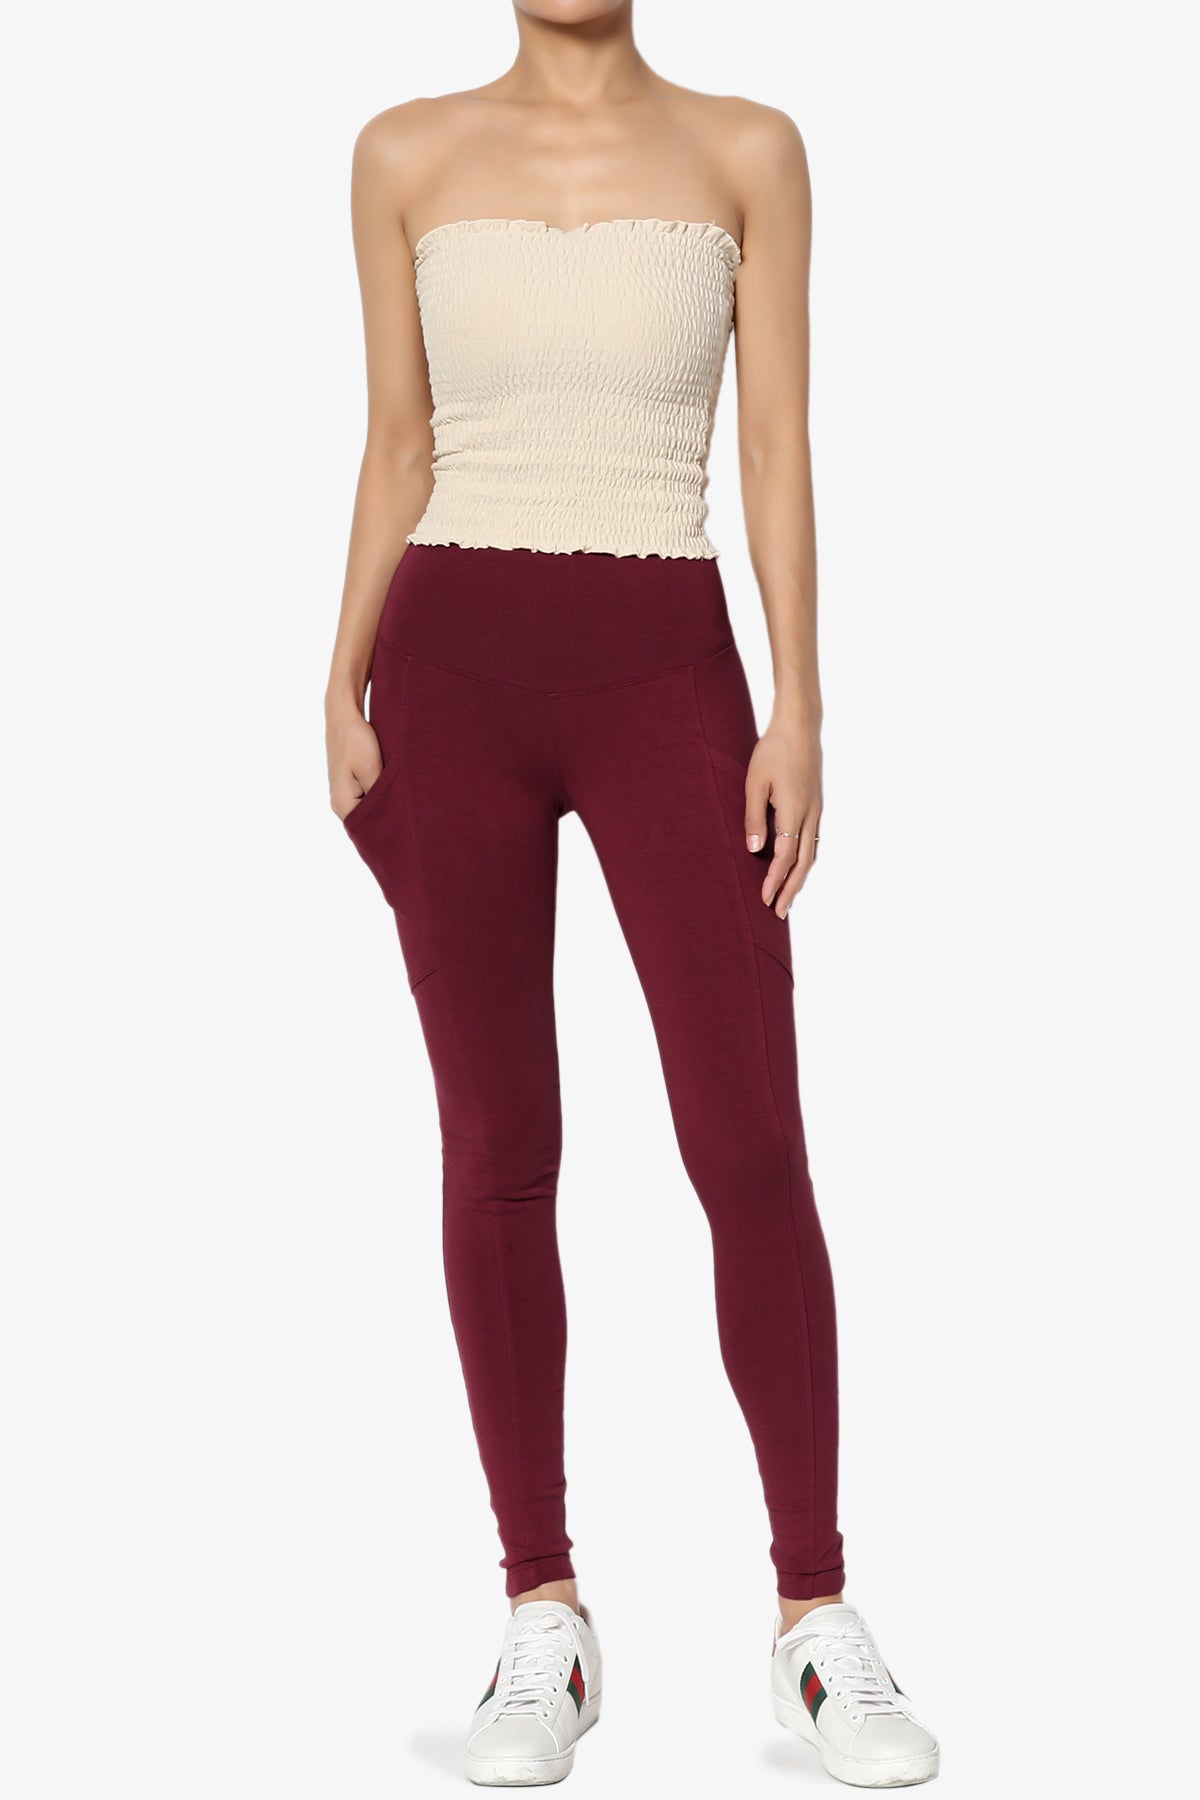 Ansley Luxe Cotton Leggings with Pockets PLUS